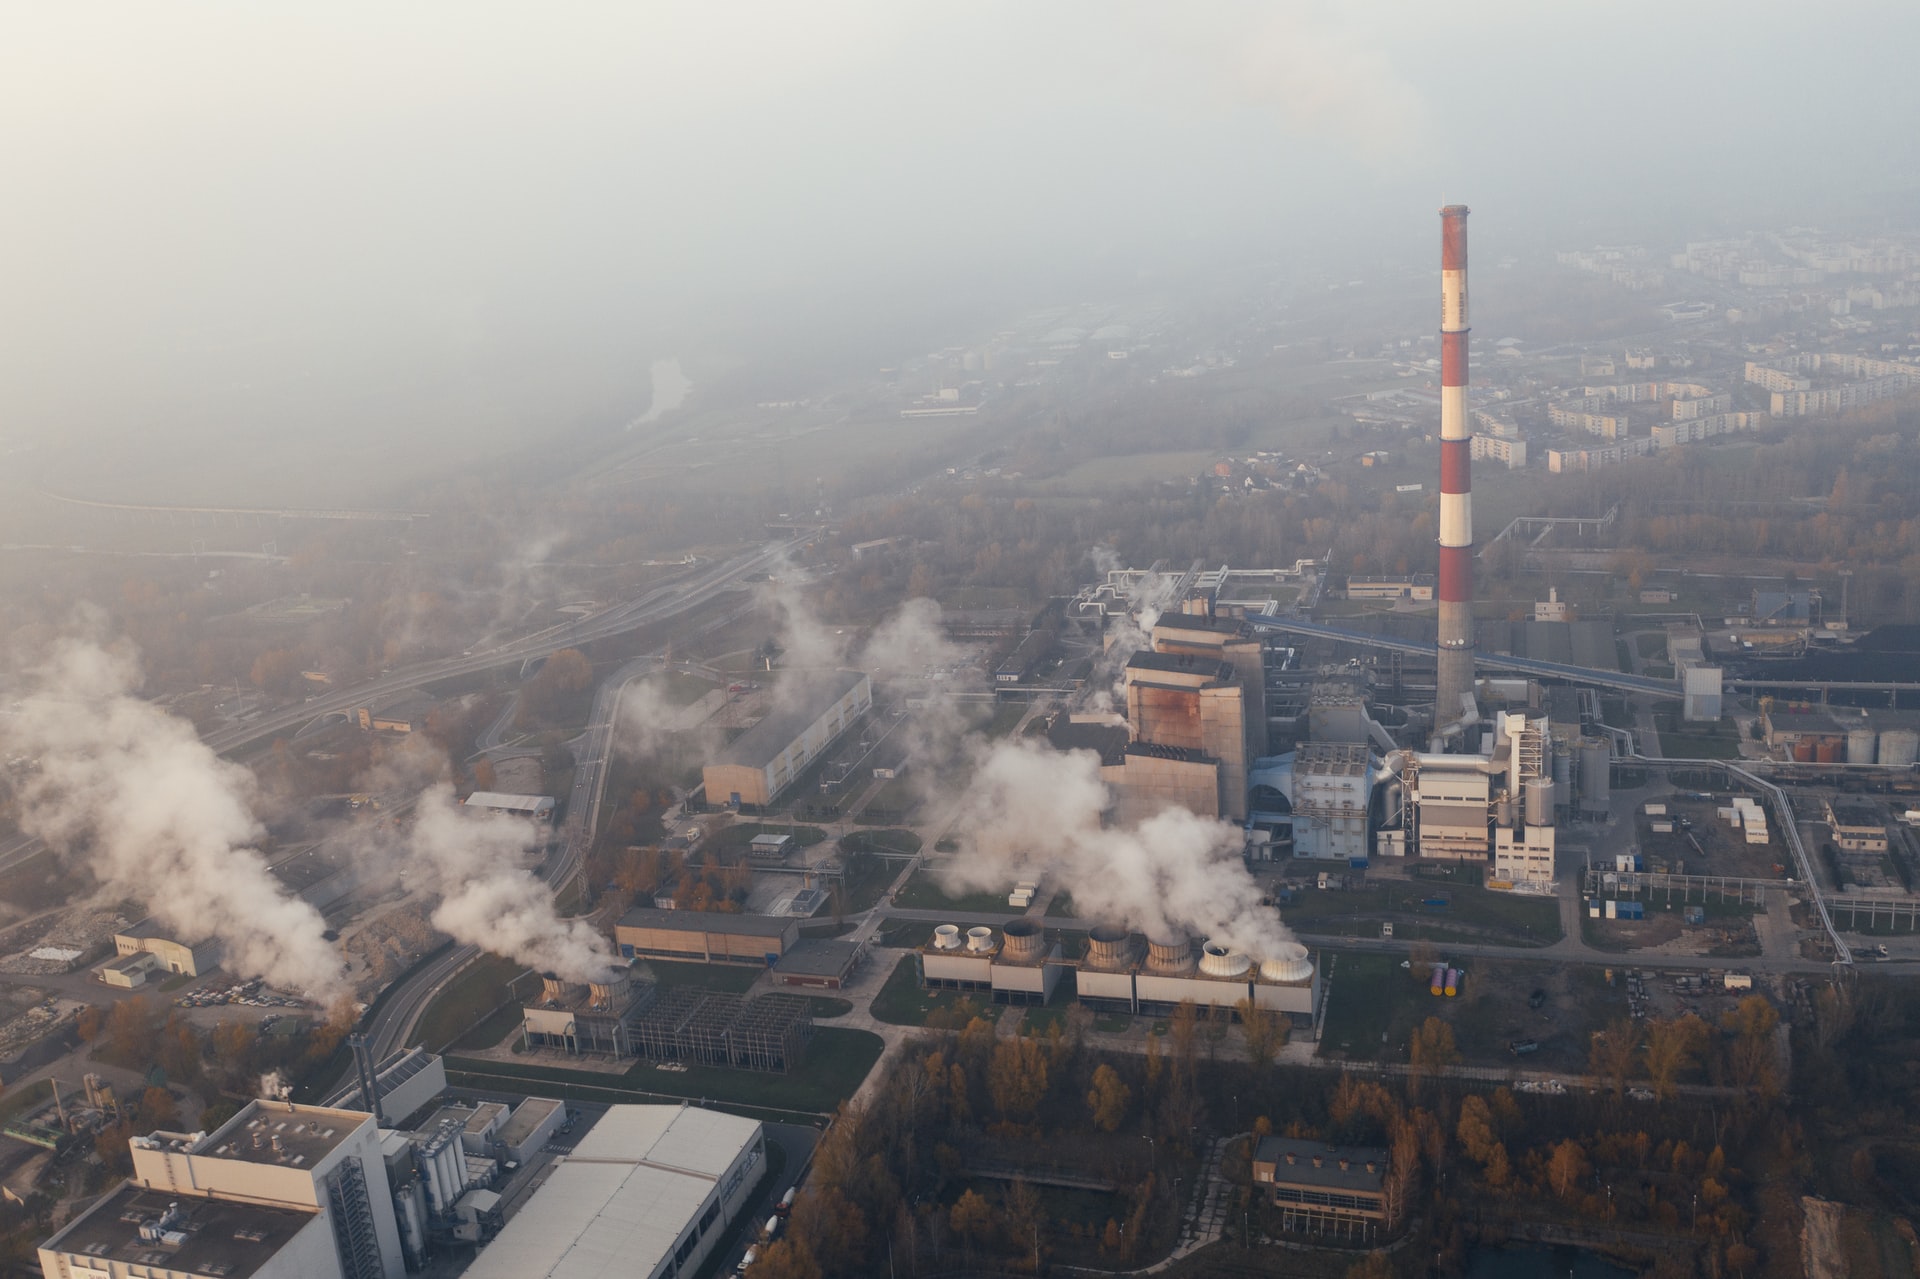 Toxic smoke pours out of industrial chimneys, polluting the air. The atmosphere has been steadily heating up to a dangerous temperature as a result of pollution like this.